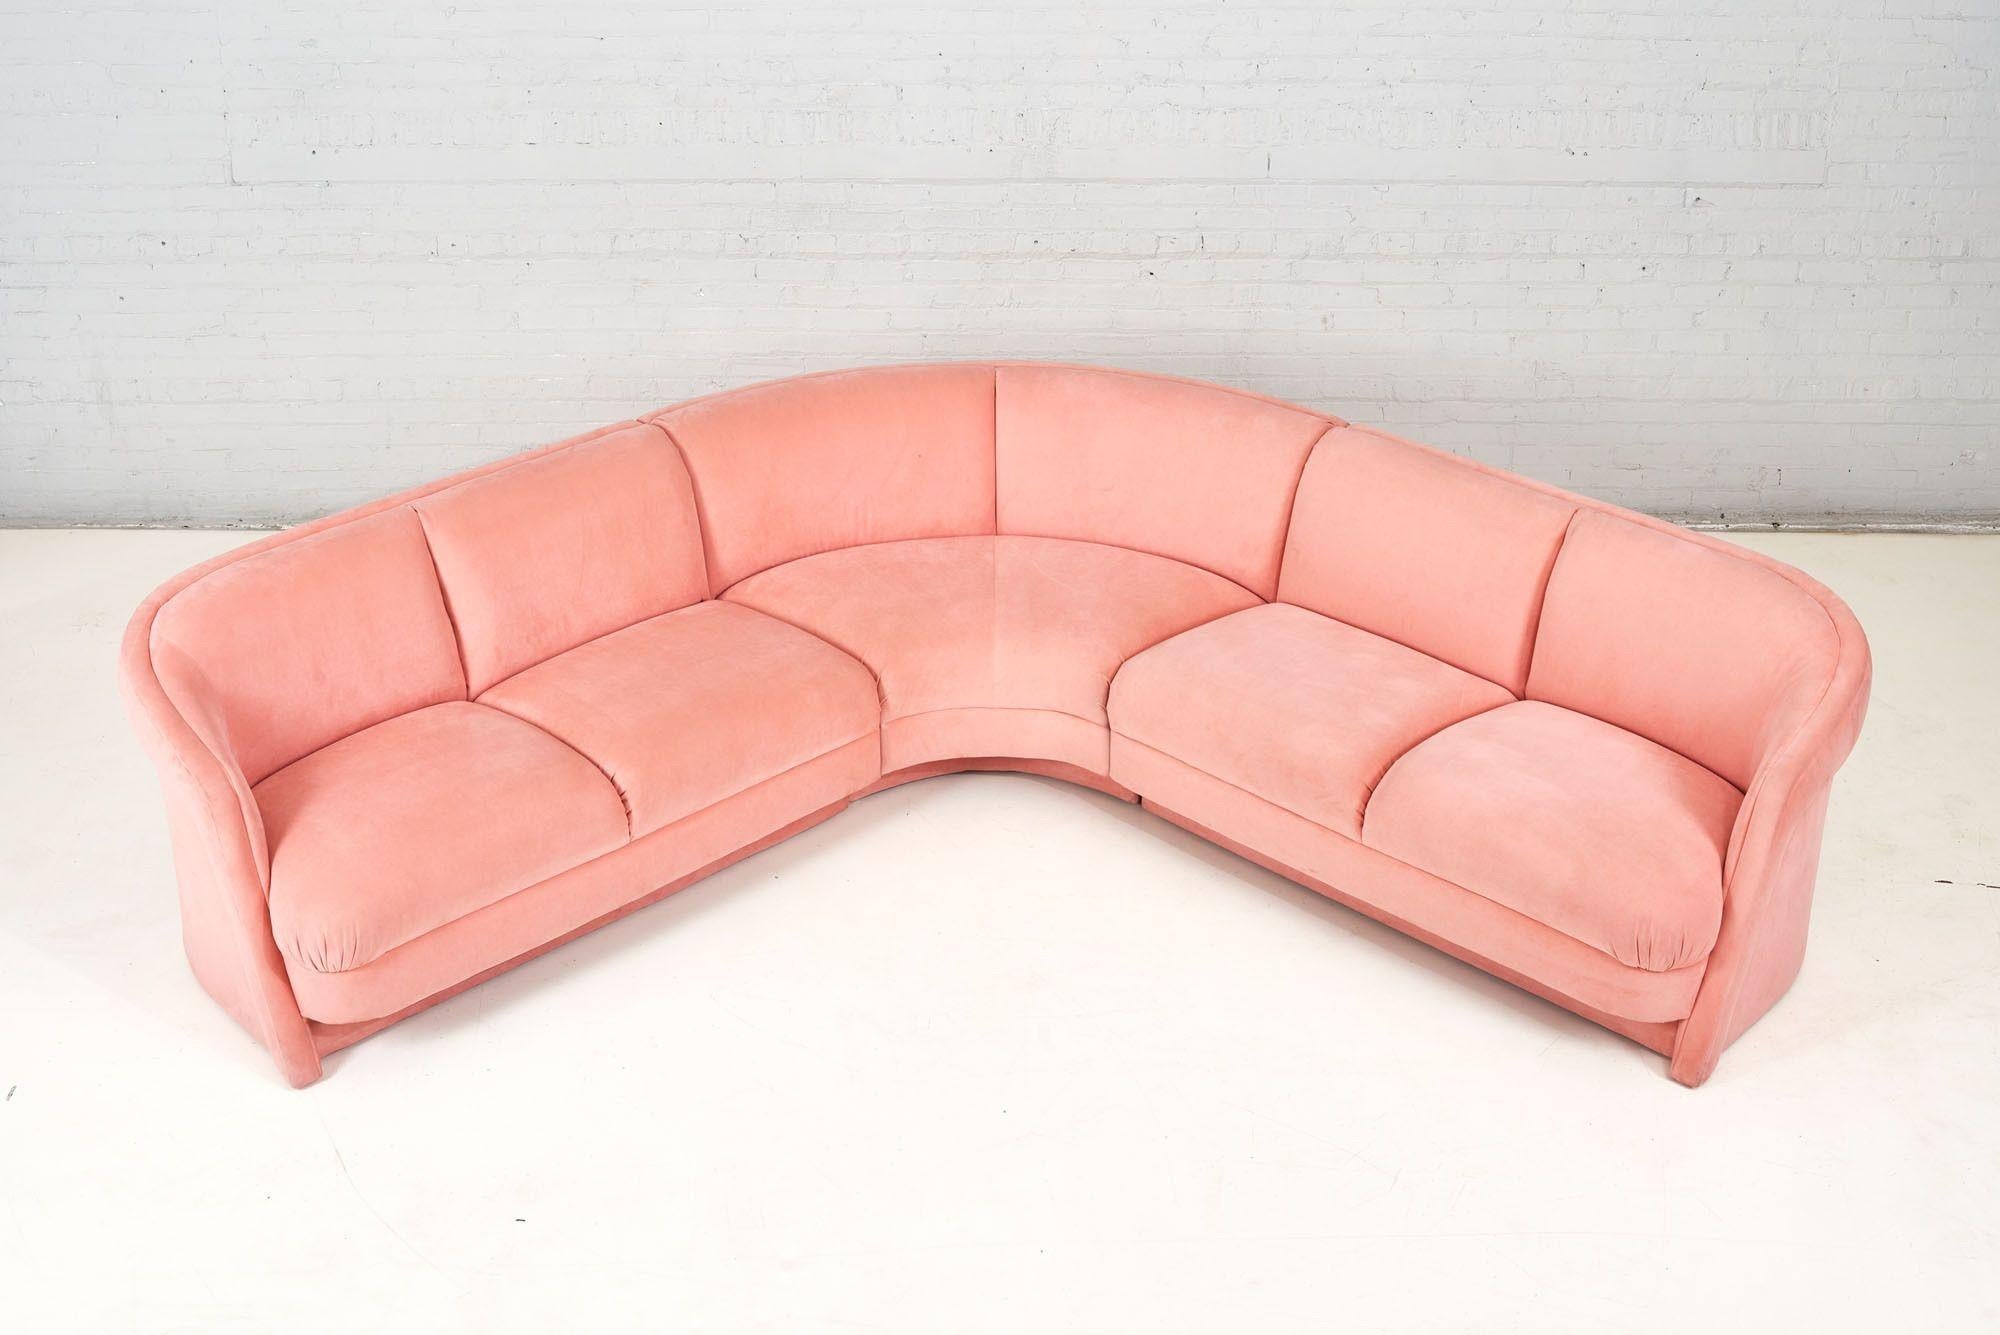 Post-Modern Pink Postmodern Sectional Sofa, Style of Milo Baughman for Thayer-Coggin, 1980 For Sale